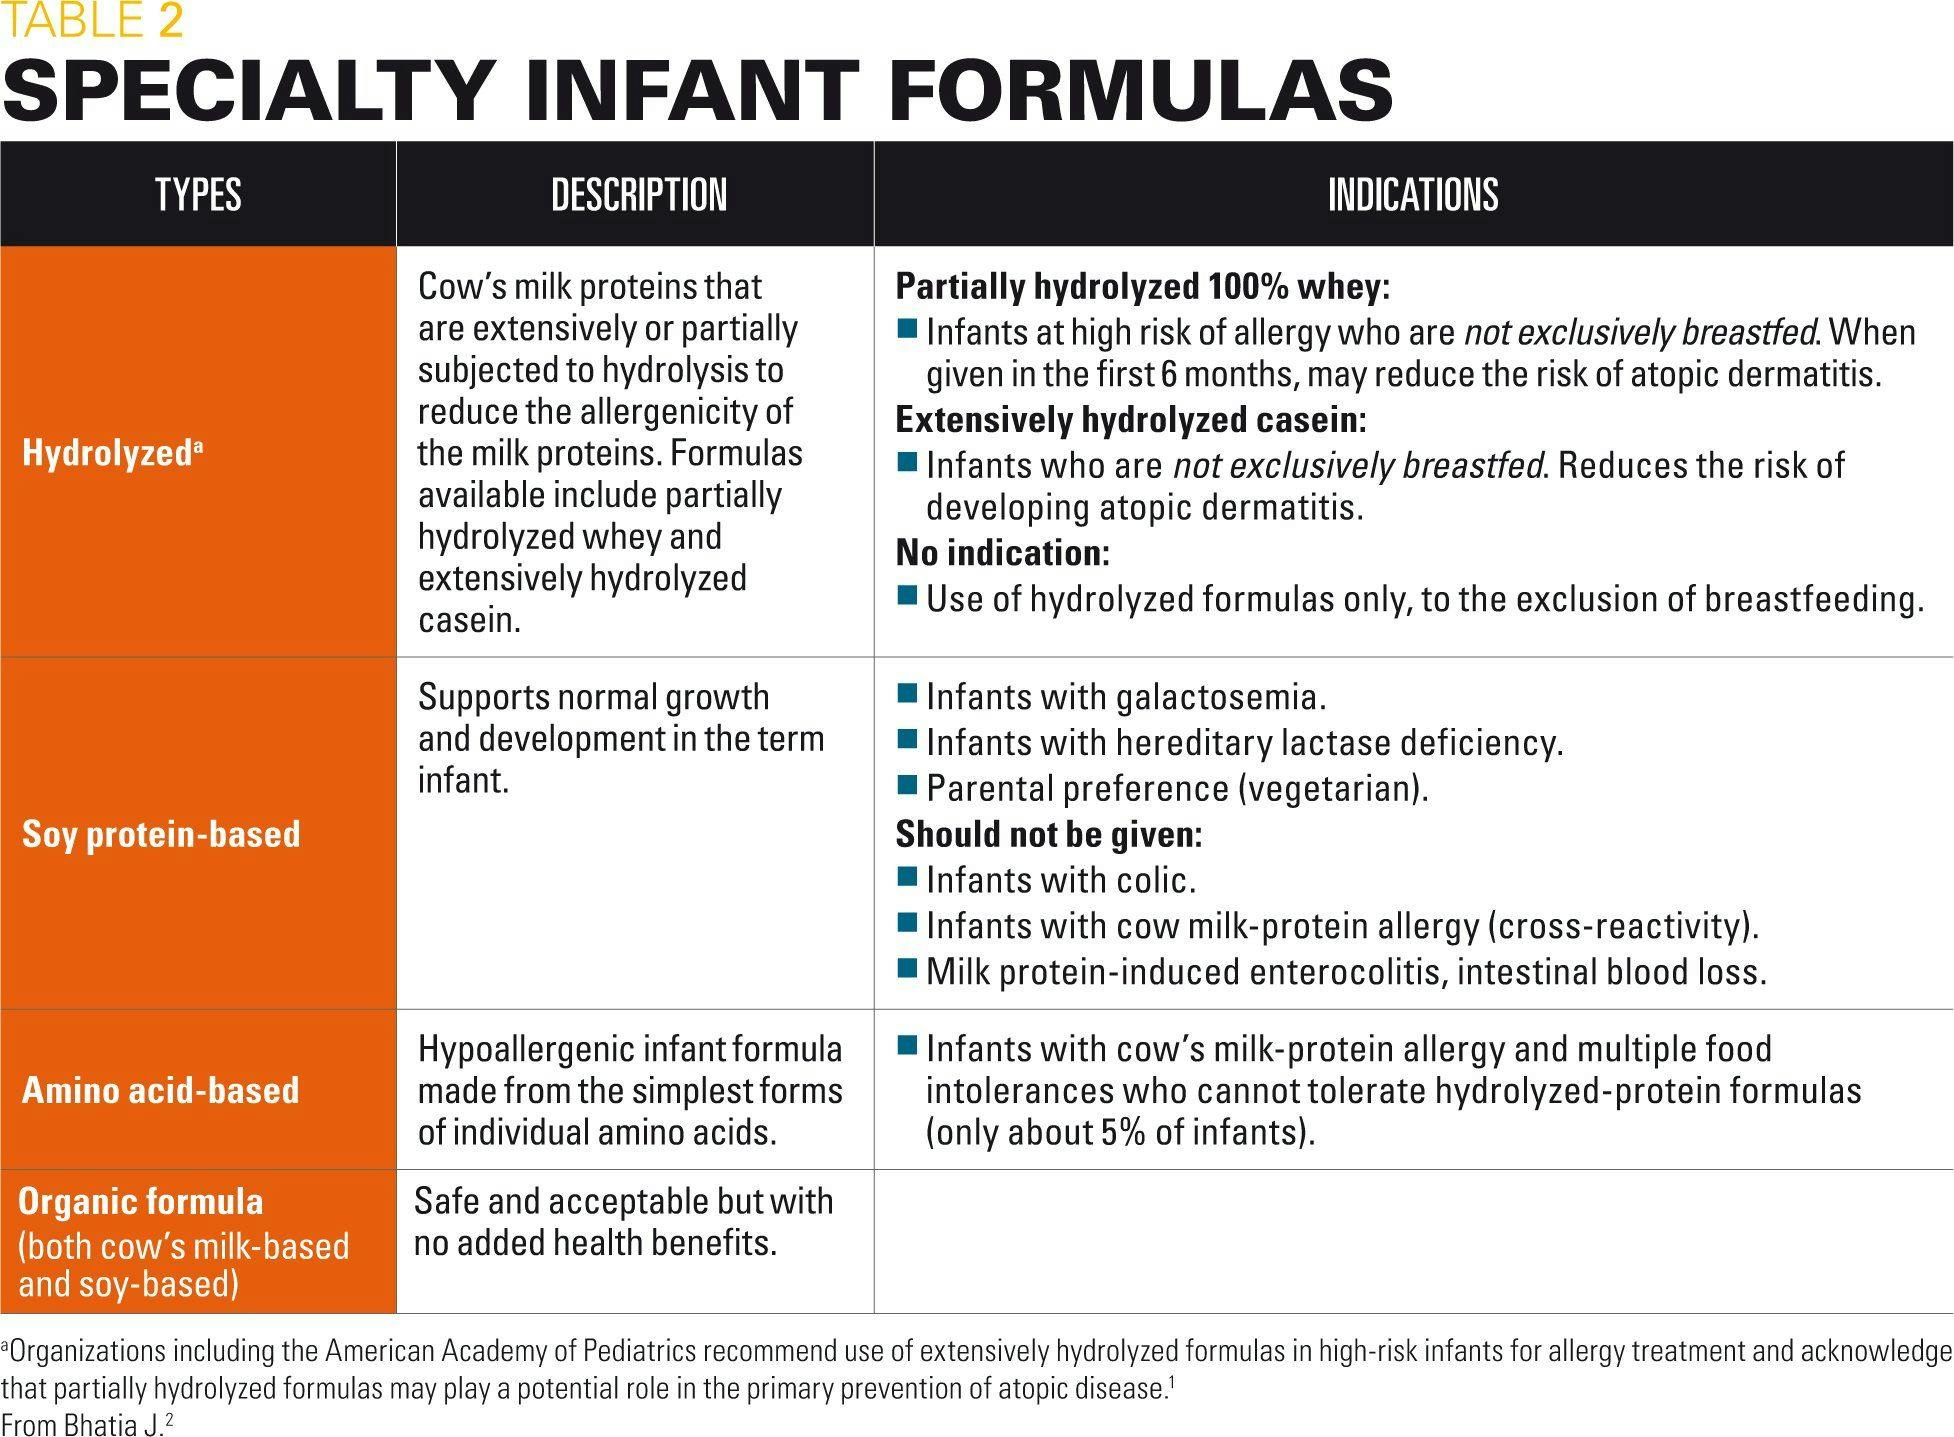 A table looking at specialty infant formulas